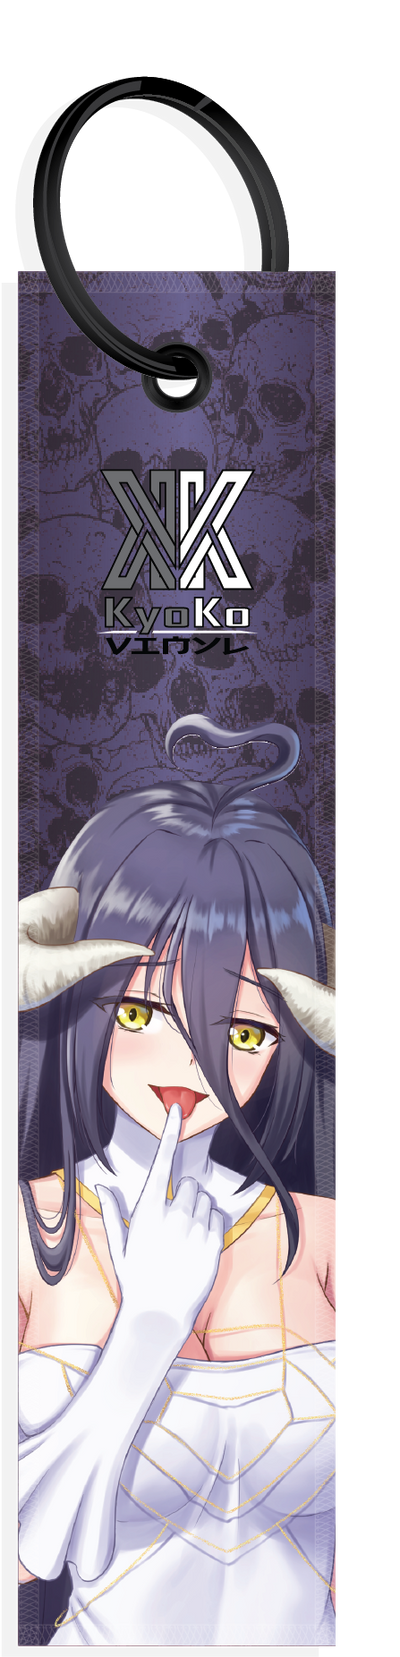 Overlord - Albedo Jet Tag (Keychain)